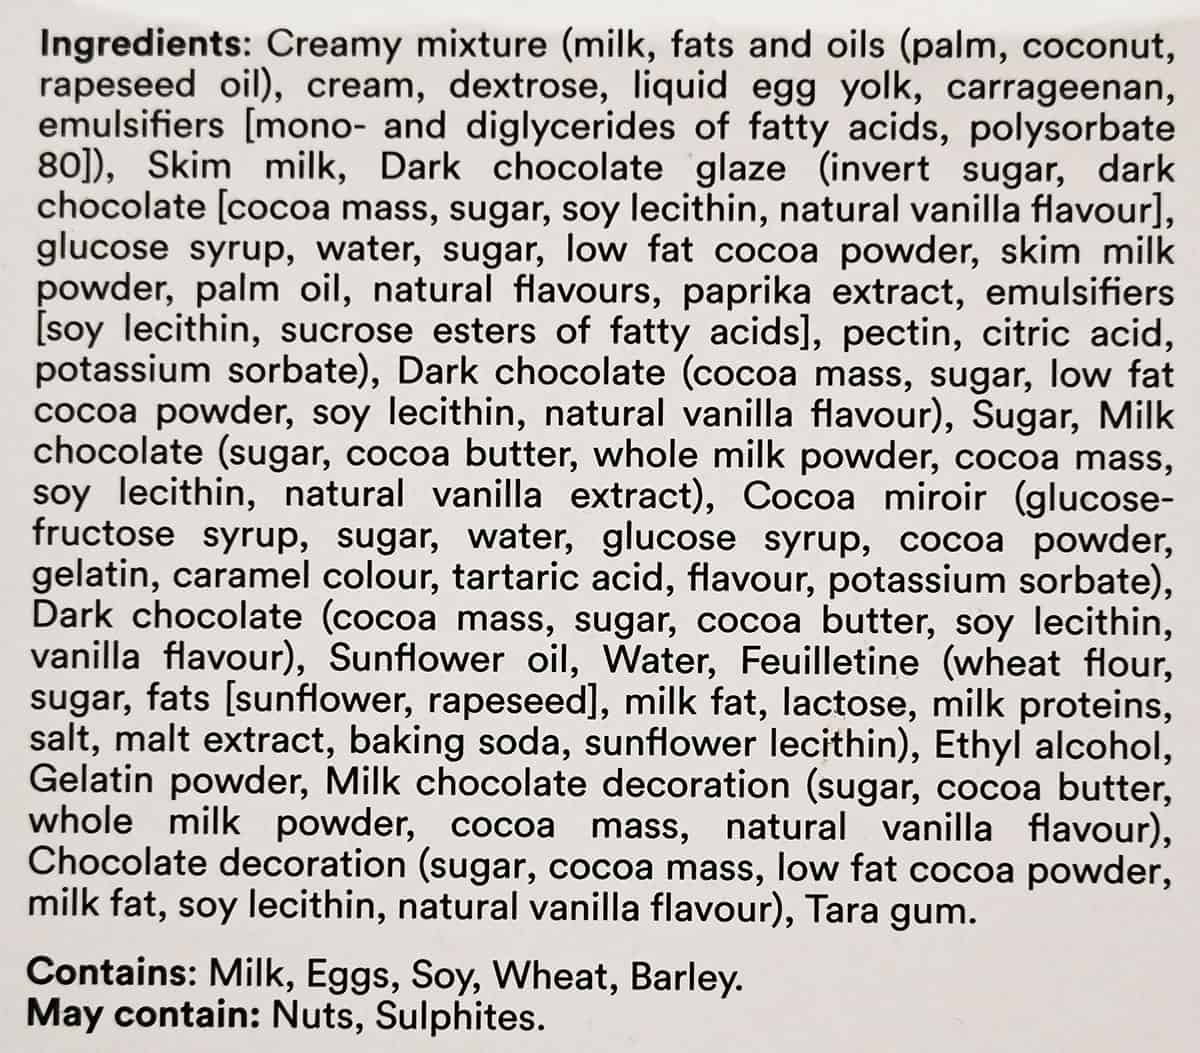 Image of the mousse ingredients list from the package.